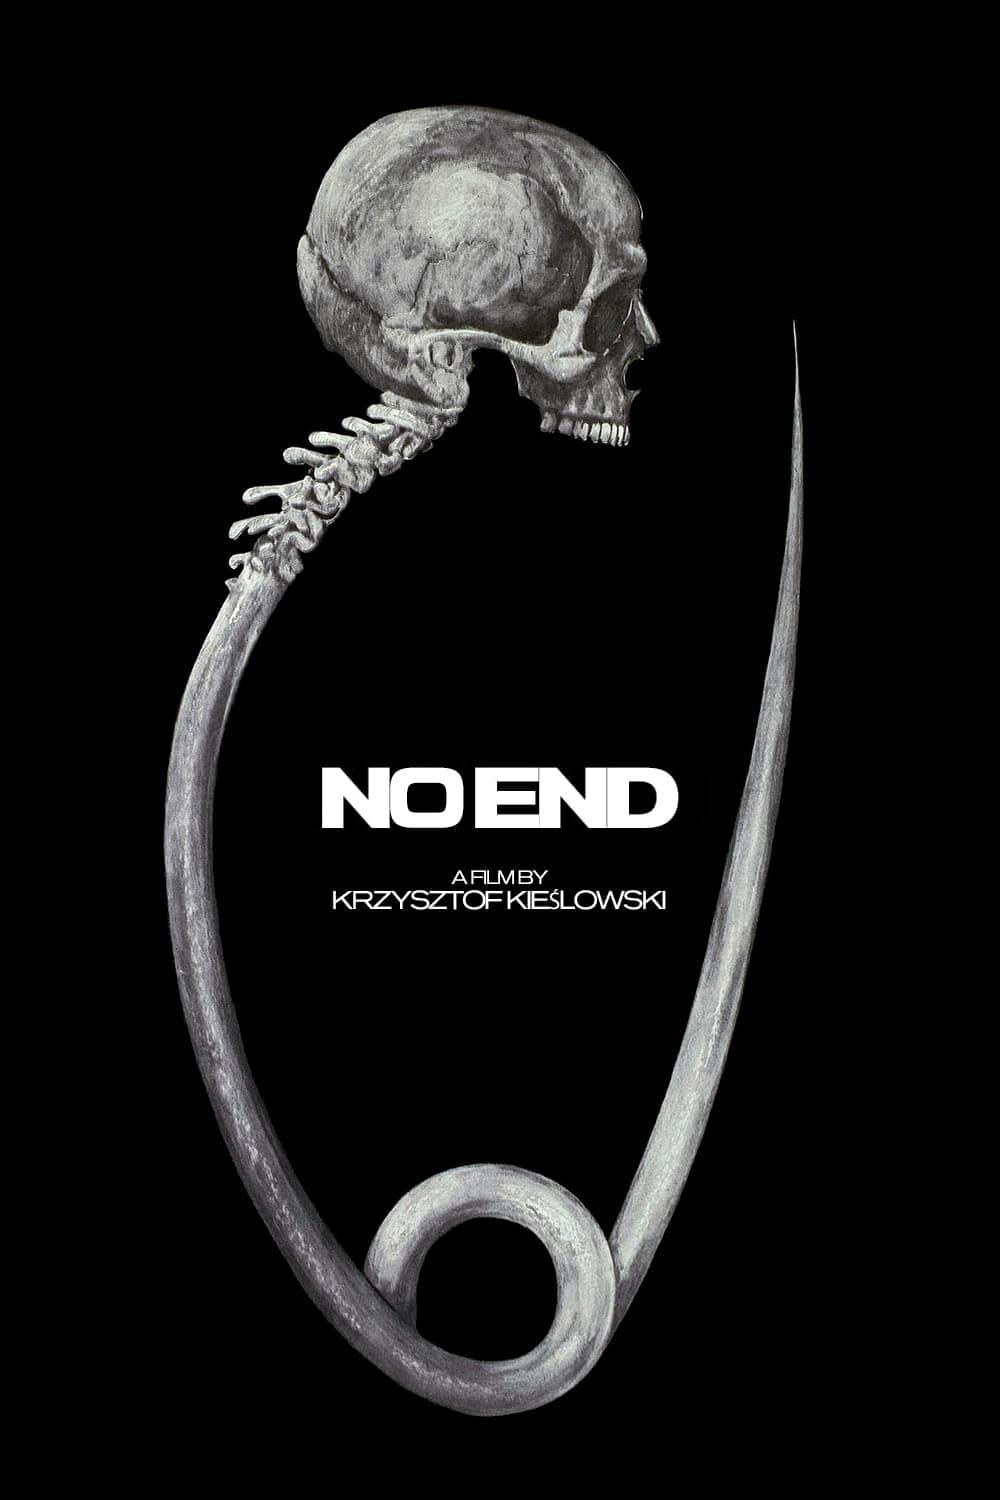 No End poster